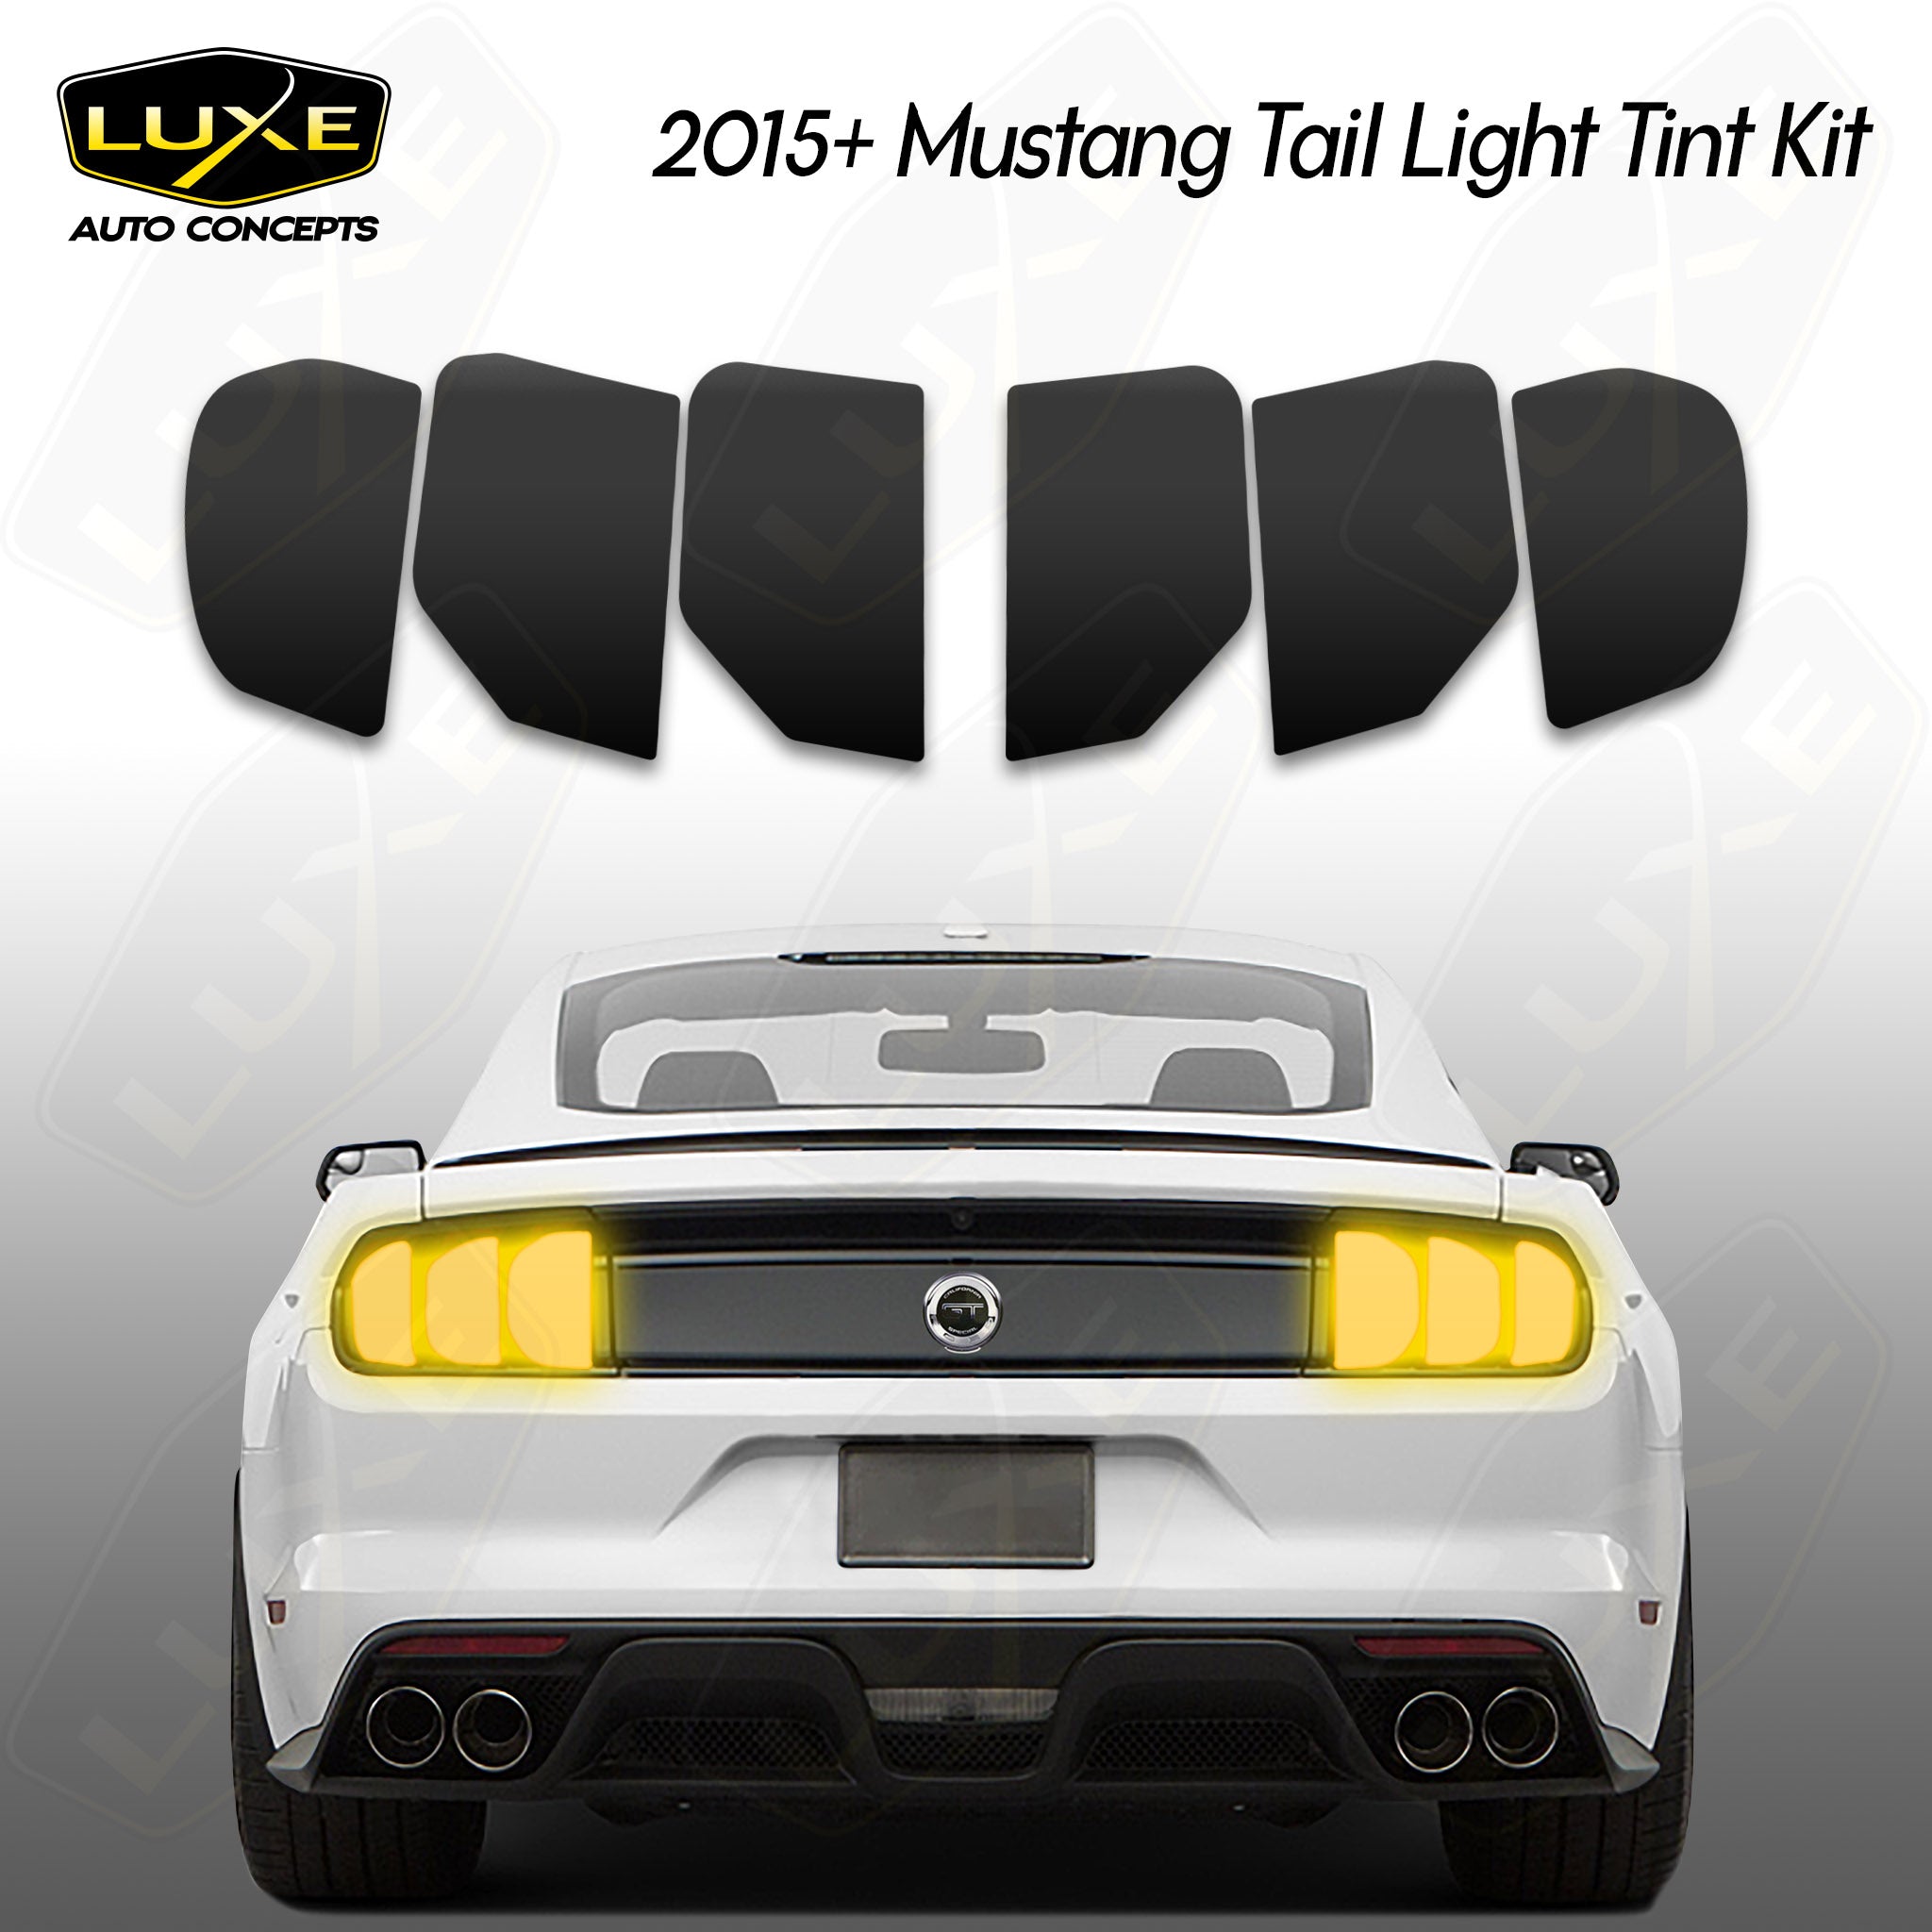 2015-17 Mustang/Shelby Tail Light Tint Kit Luxe Auto Concepts